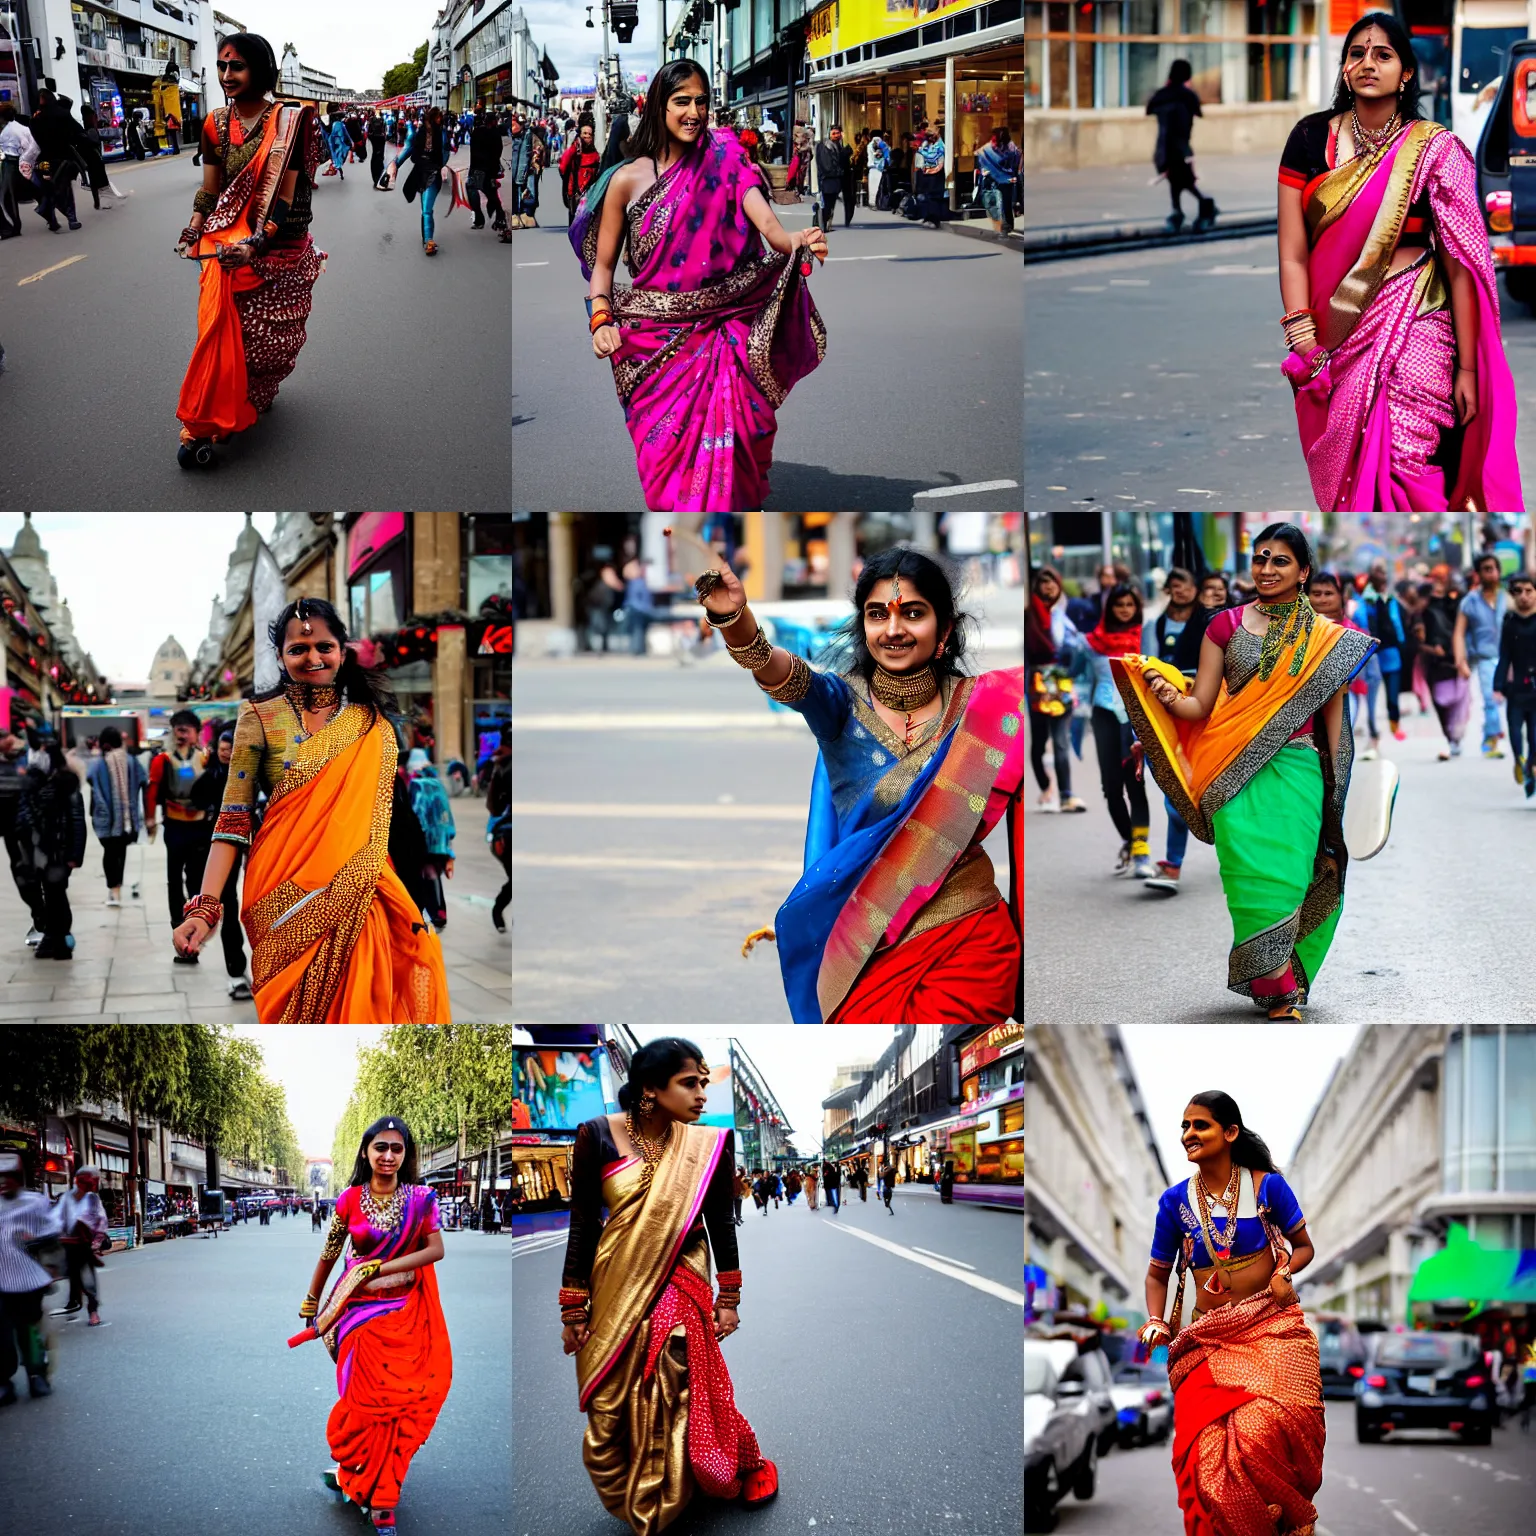 Prompt: A young Indian woman, wearing an extravagant sari, on a skateboard in Oxford Street